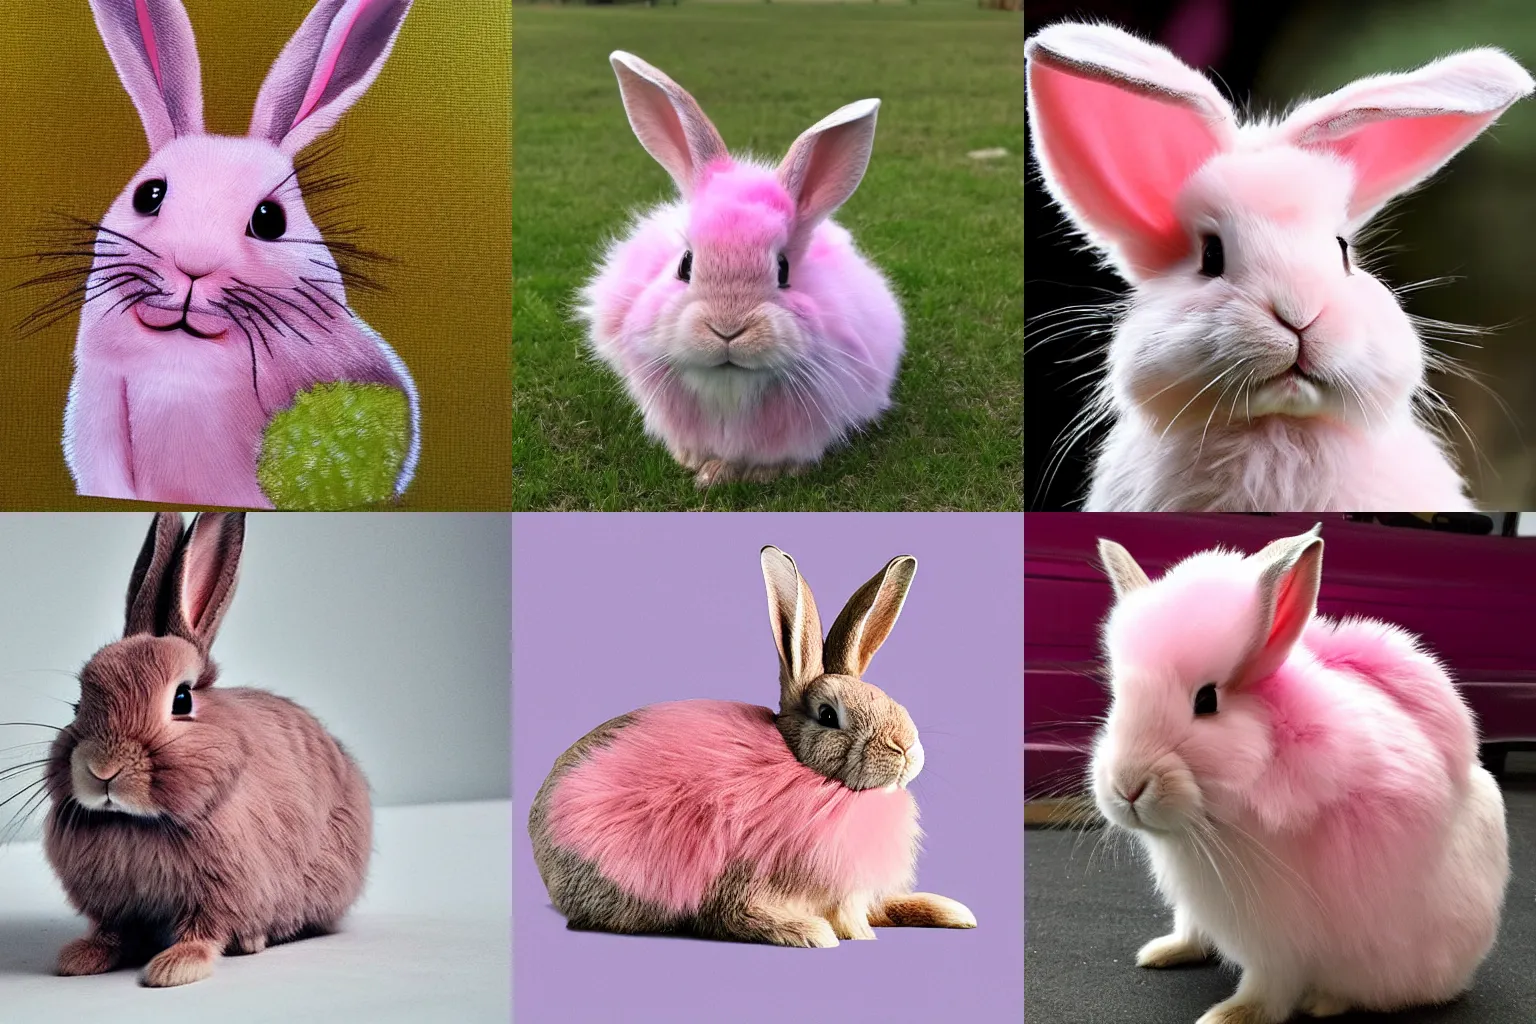 Prompt: A rabbit with pink fur